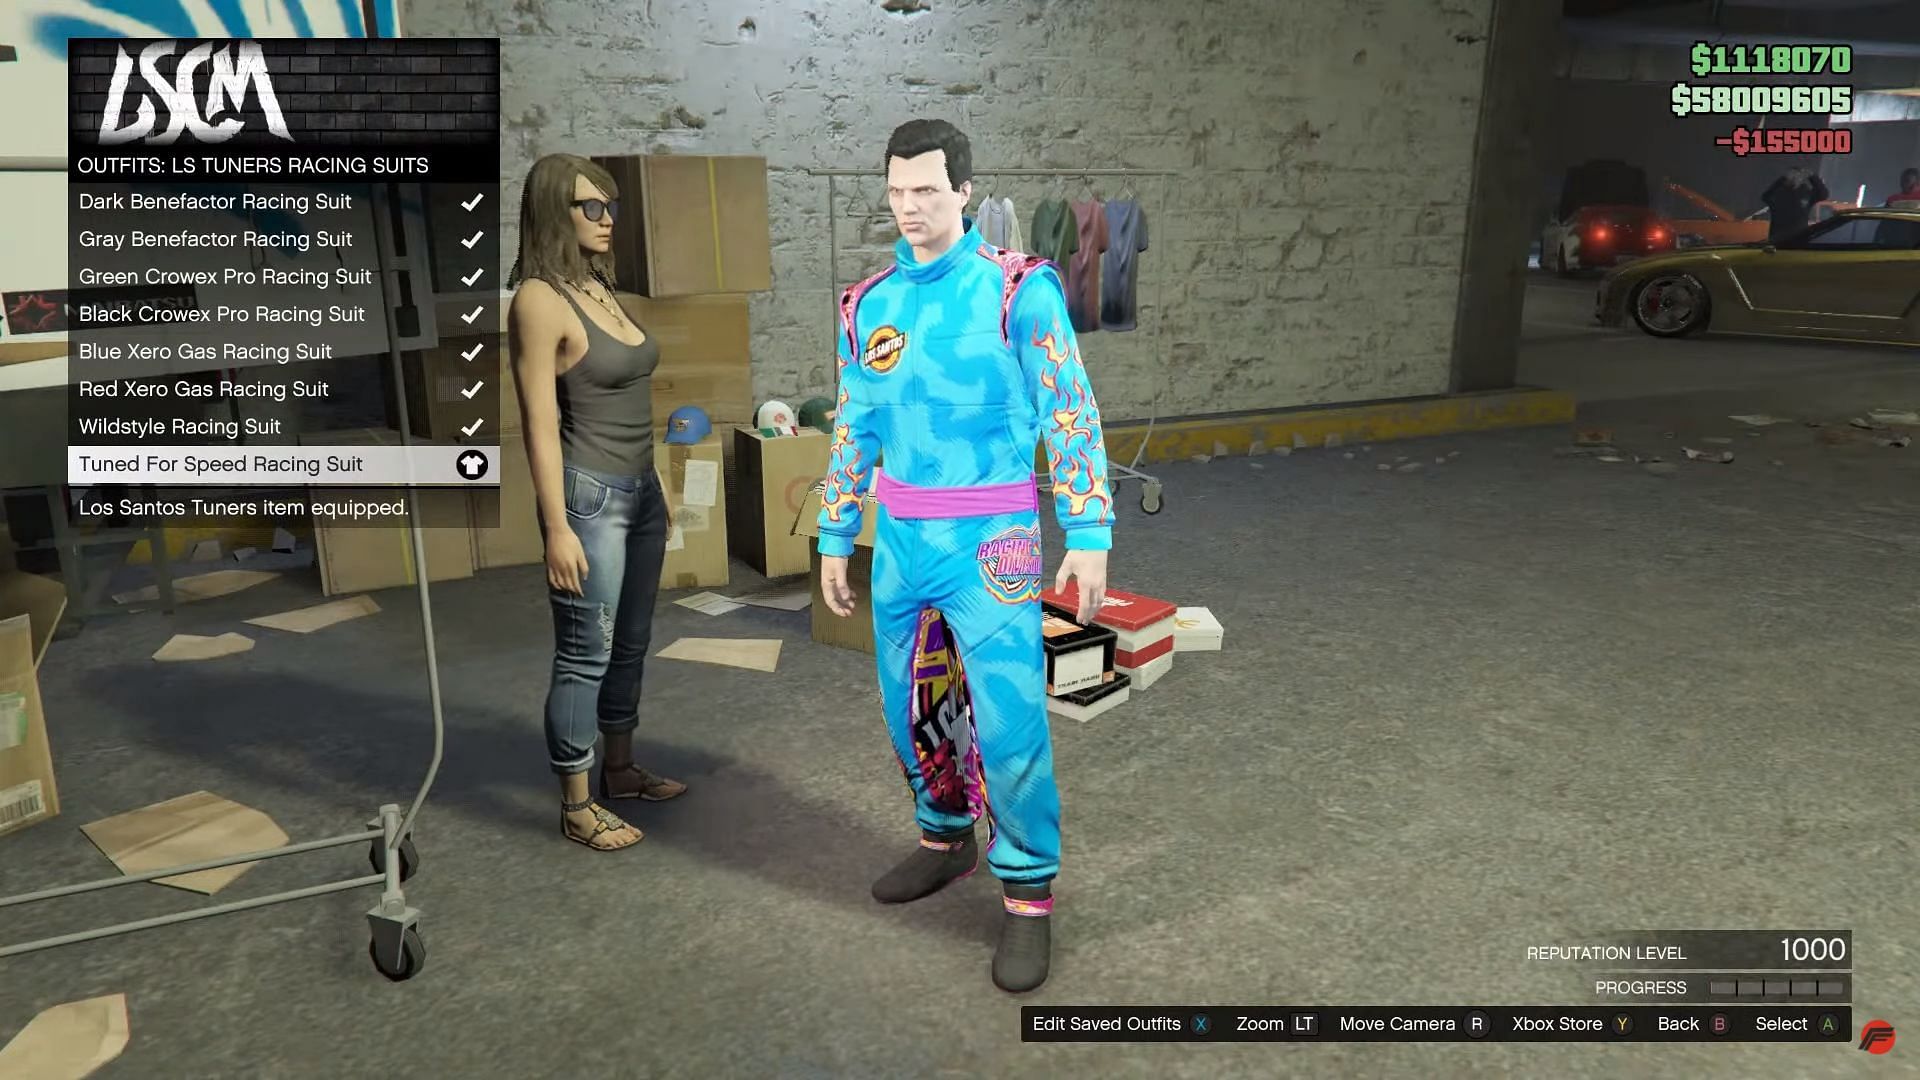 This would be the final reward you could buy from the Merch Store (Image via GTA Wiki)